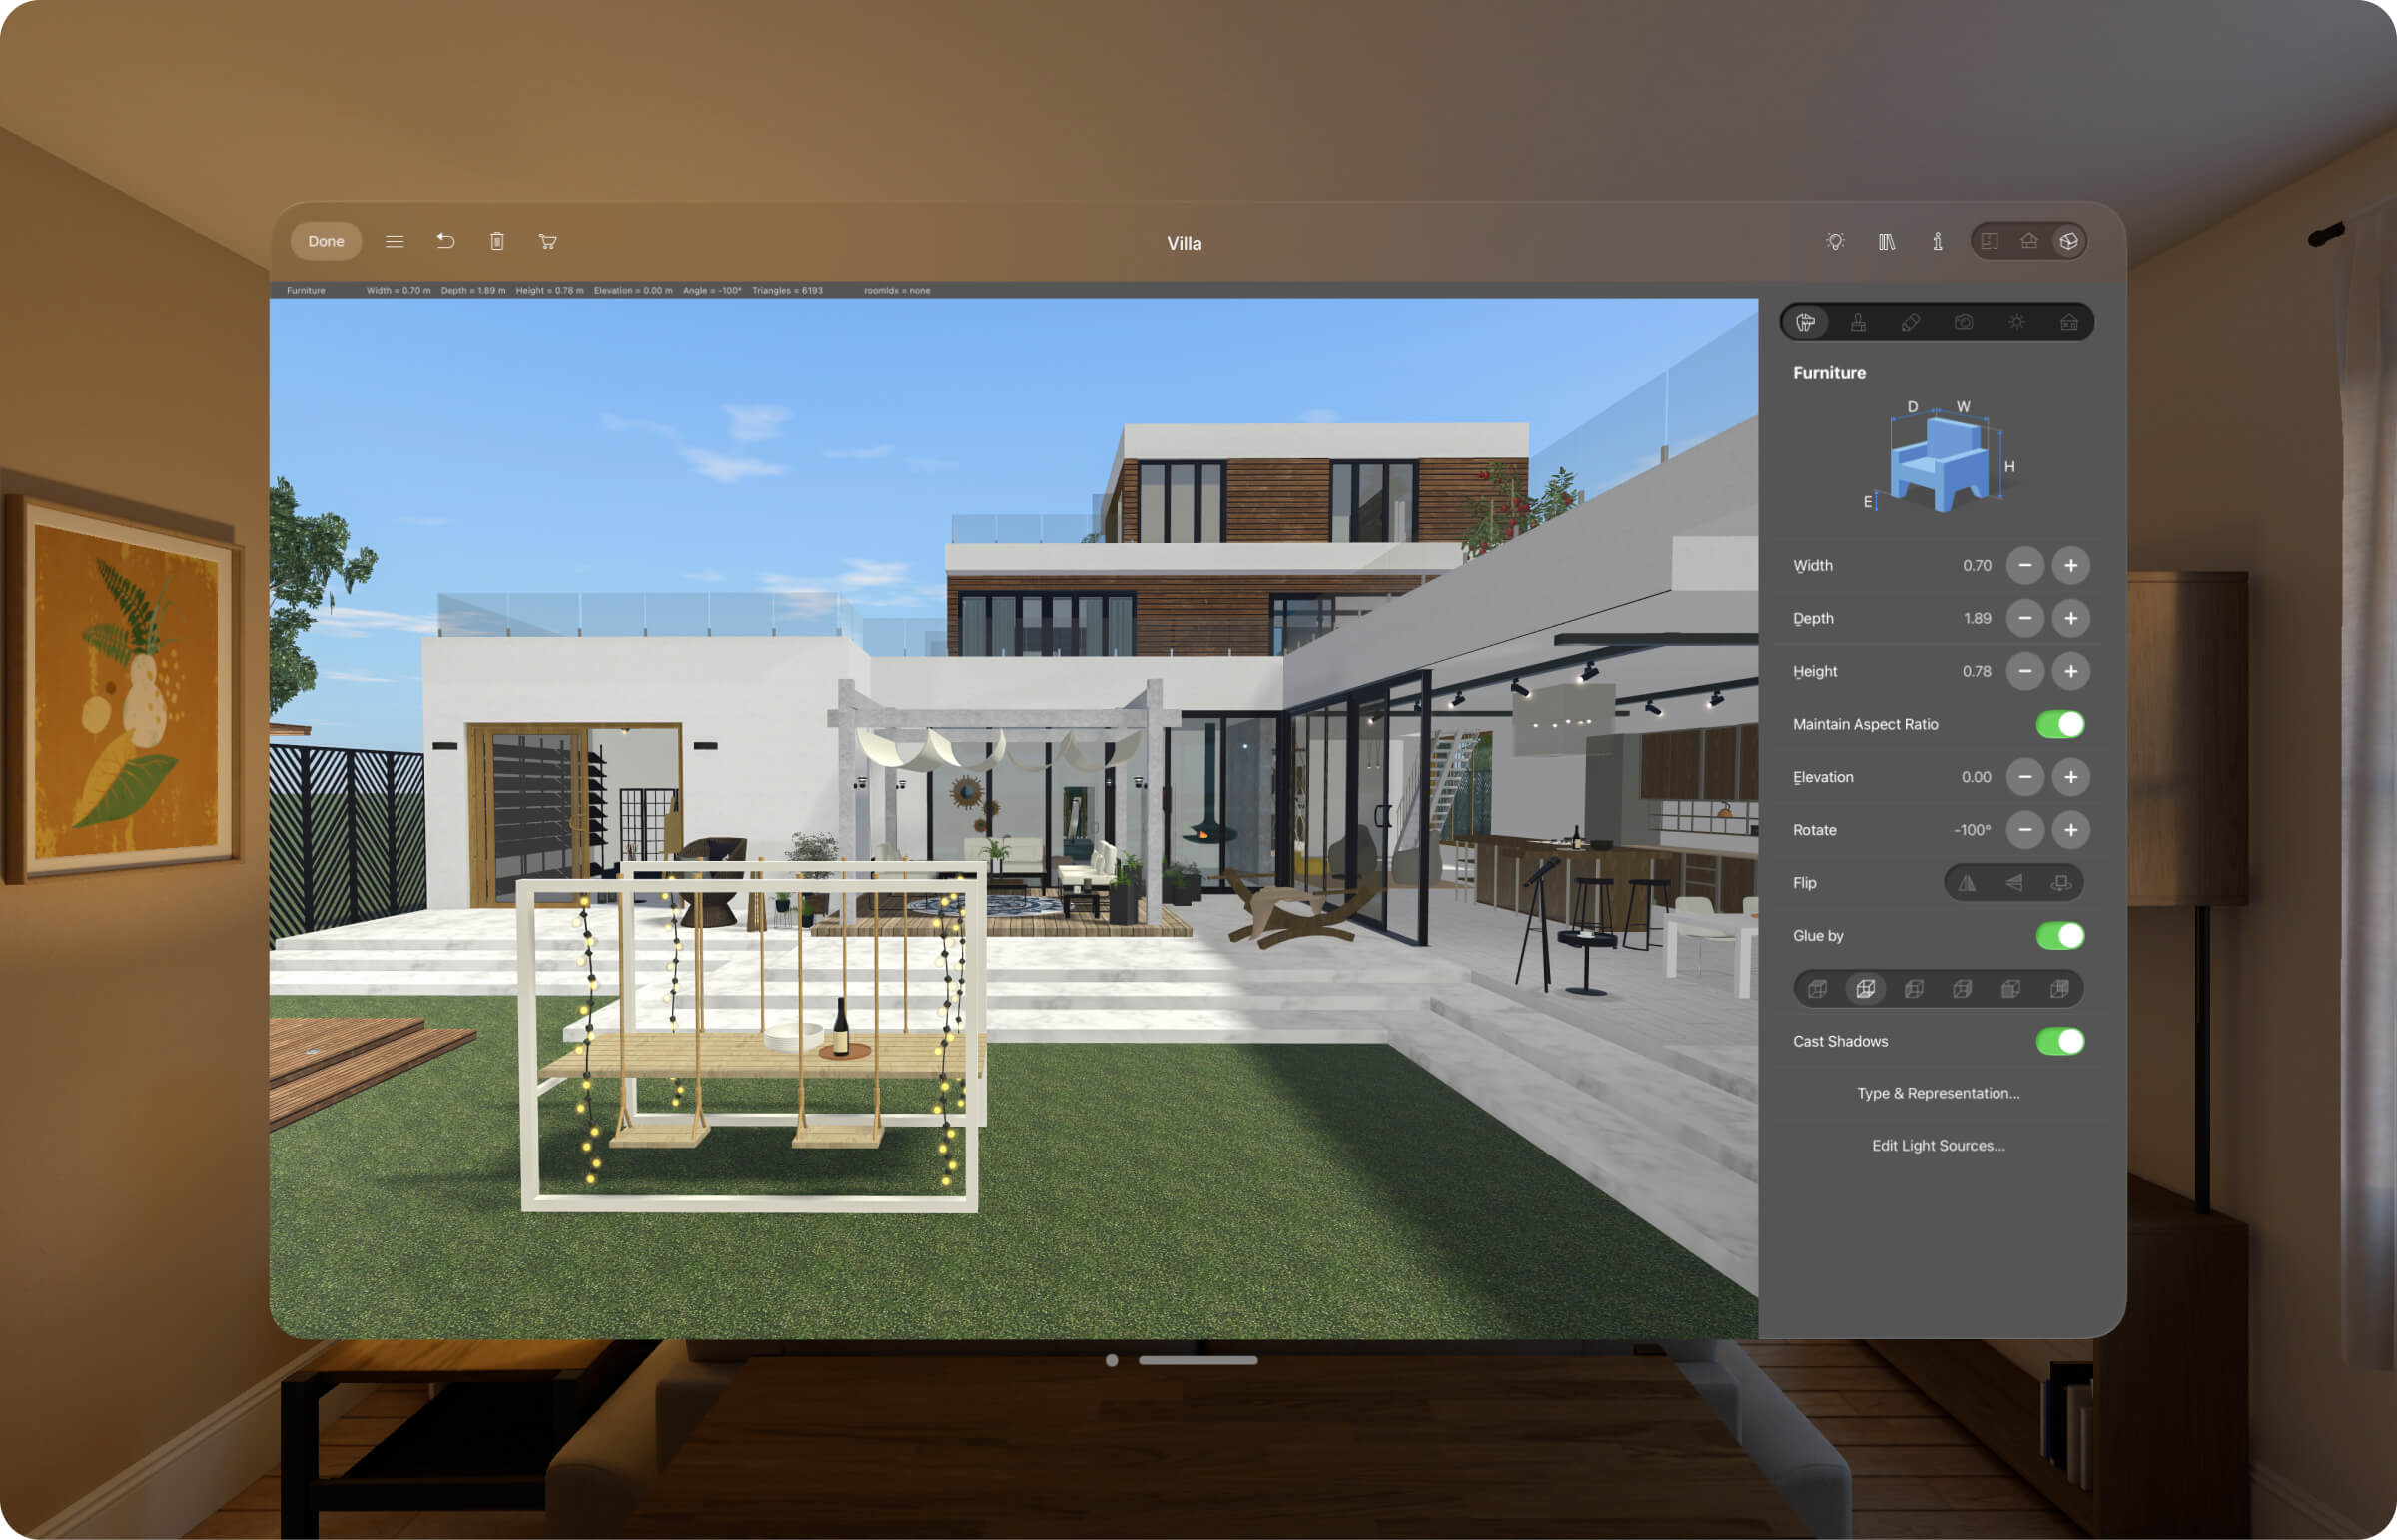 A house with a backyard designed in Live Home 3D for VisionOS.